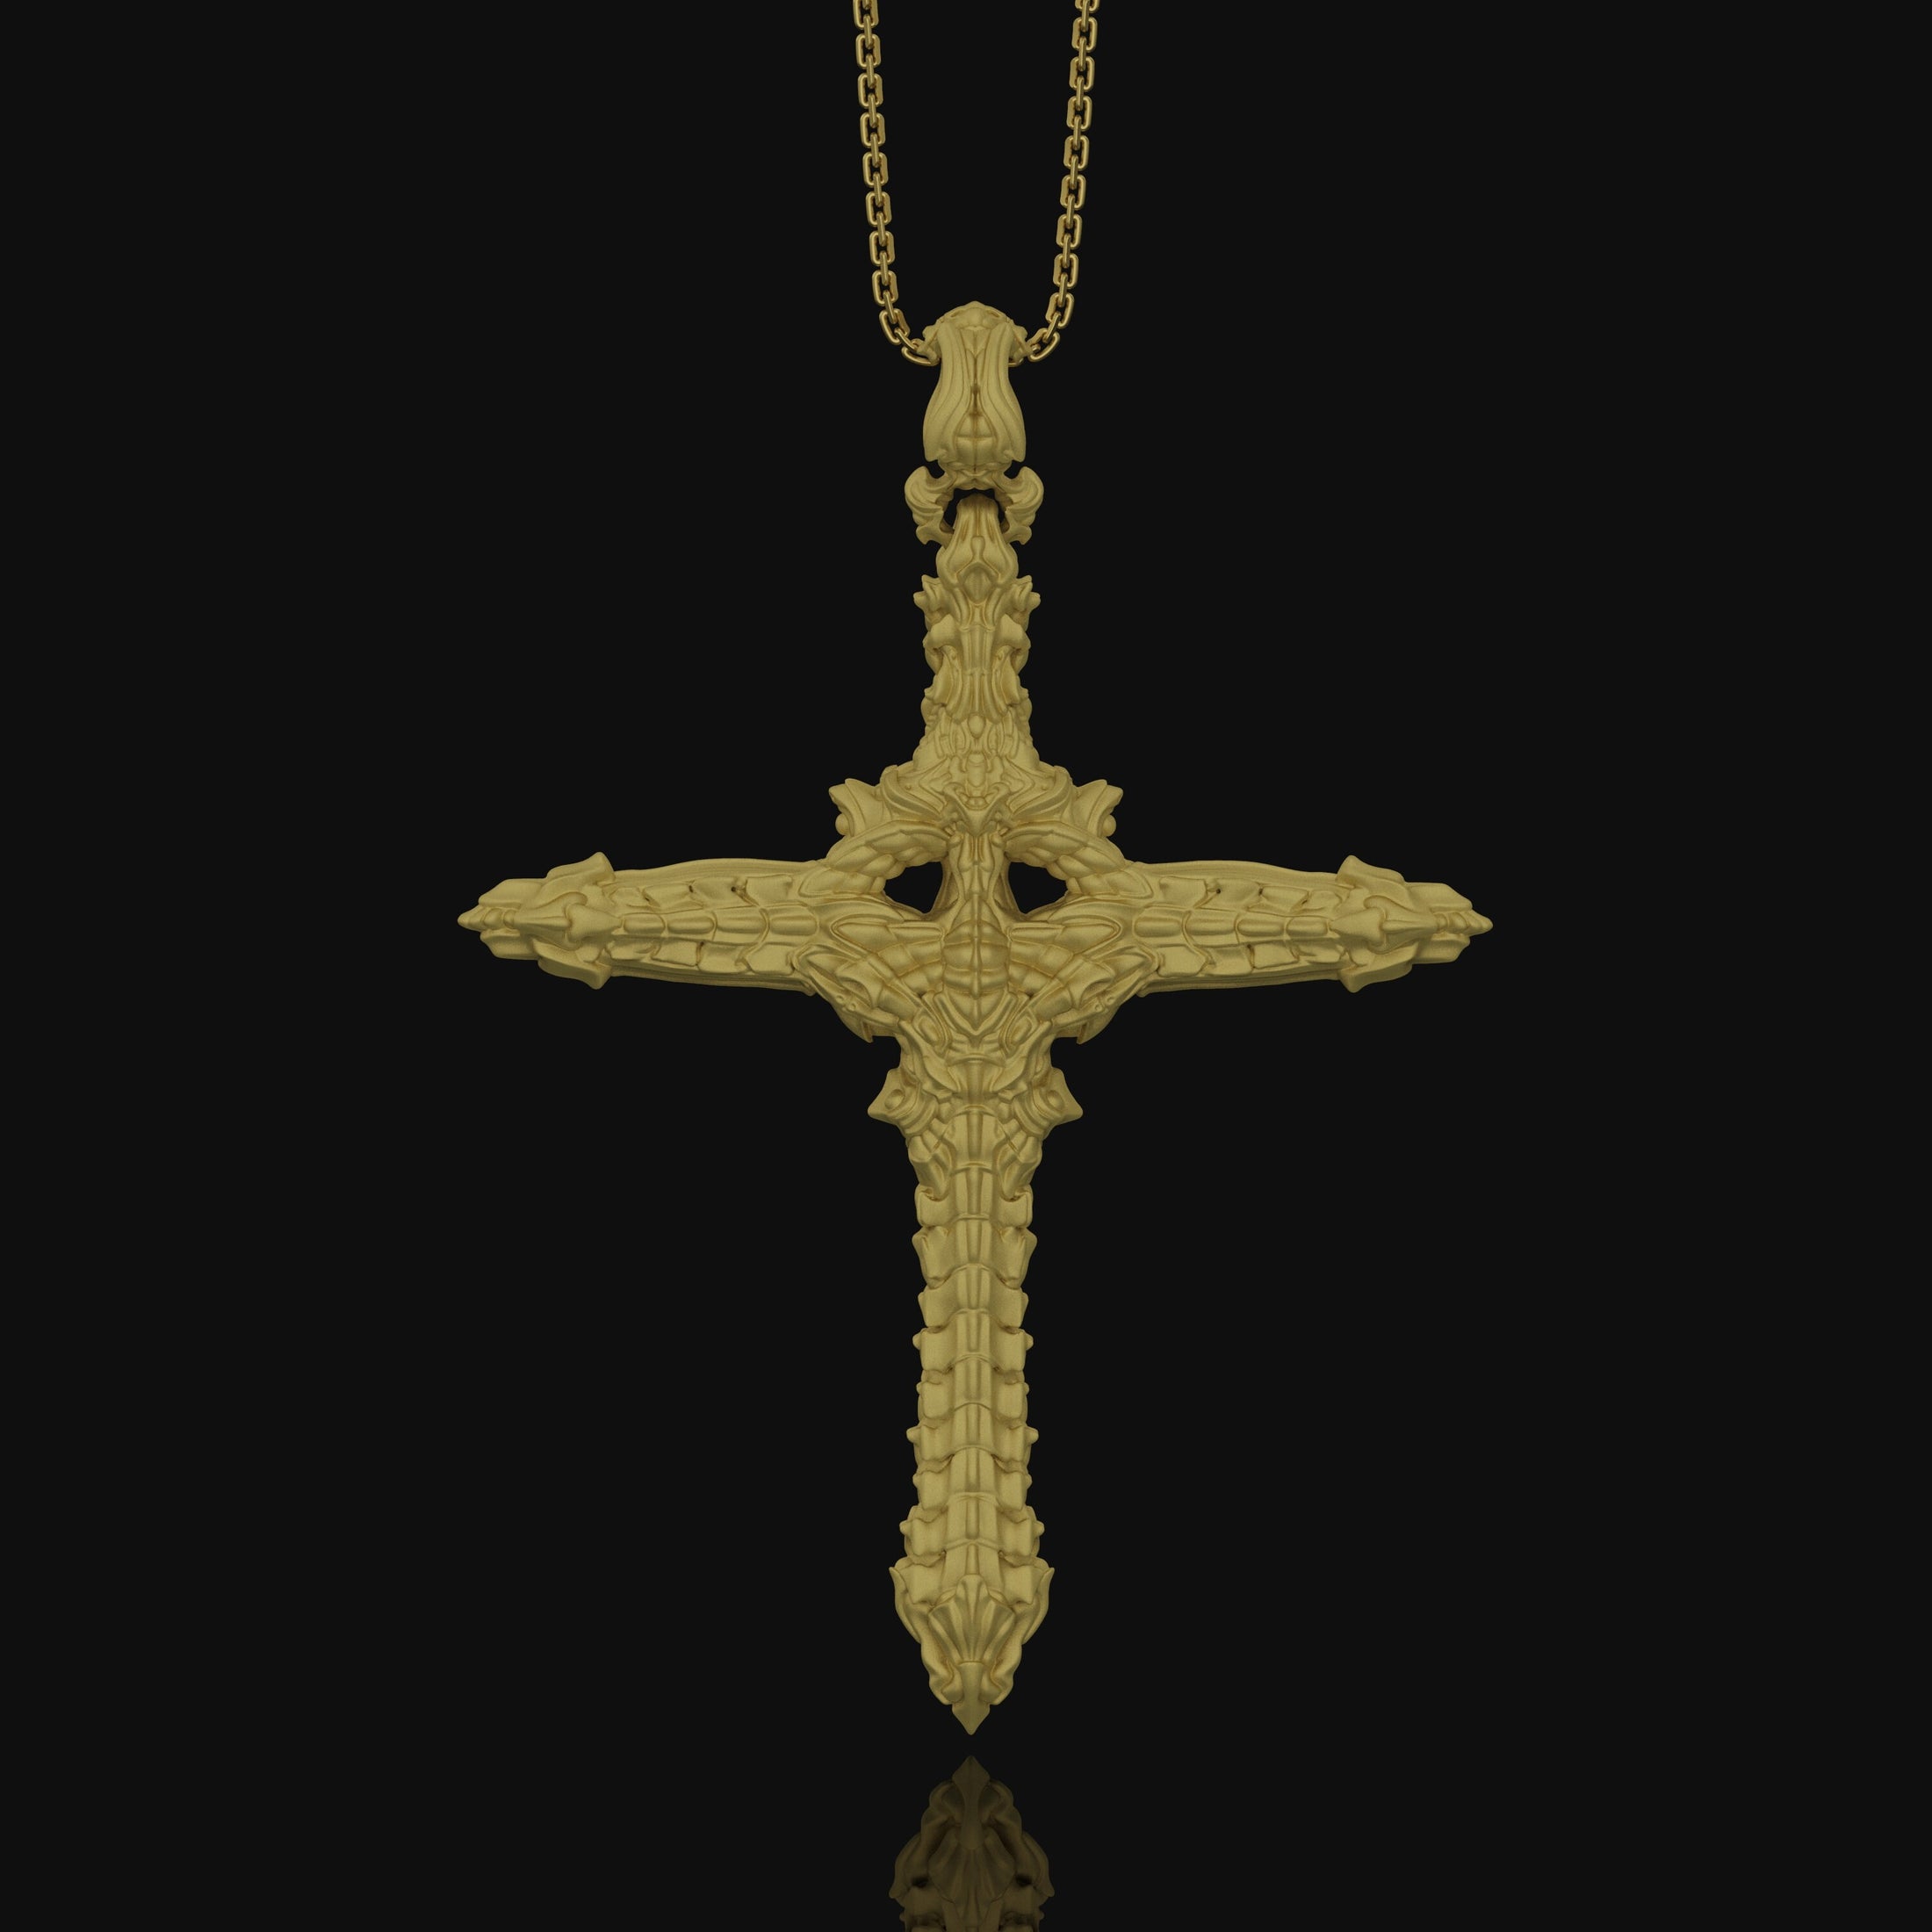 Gothic Cross Necklace, Christmas Gift, Biomechanical Cross, Men's Gothic Jewelry, Women's Cross, Gothic Christian Gift Gold Matte